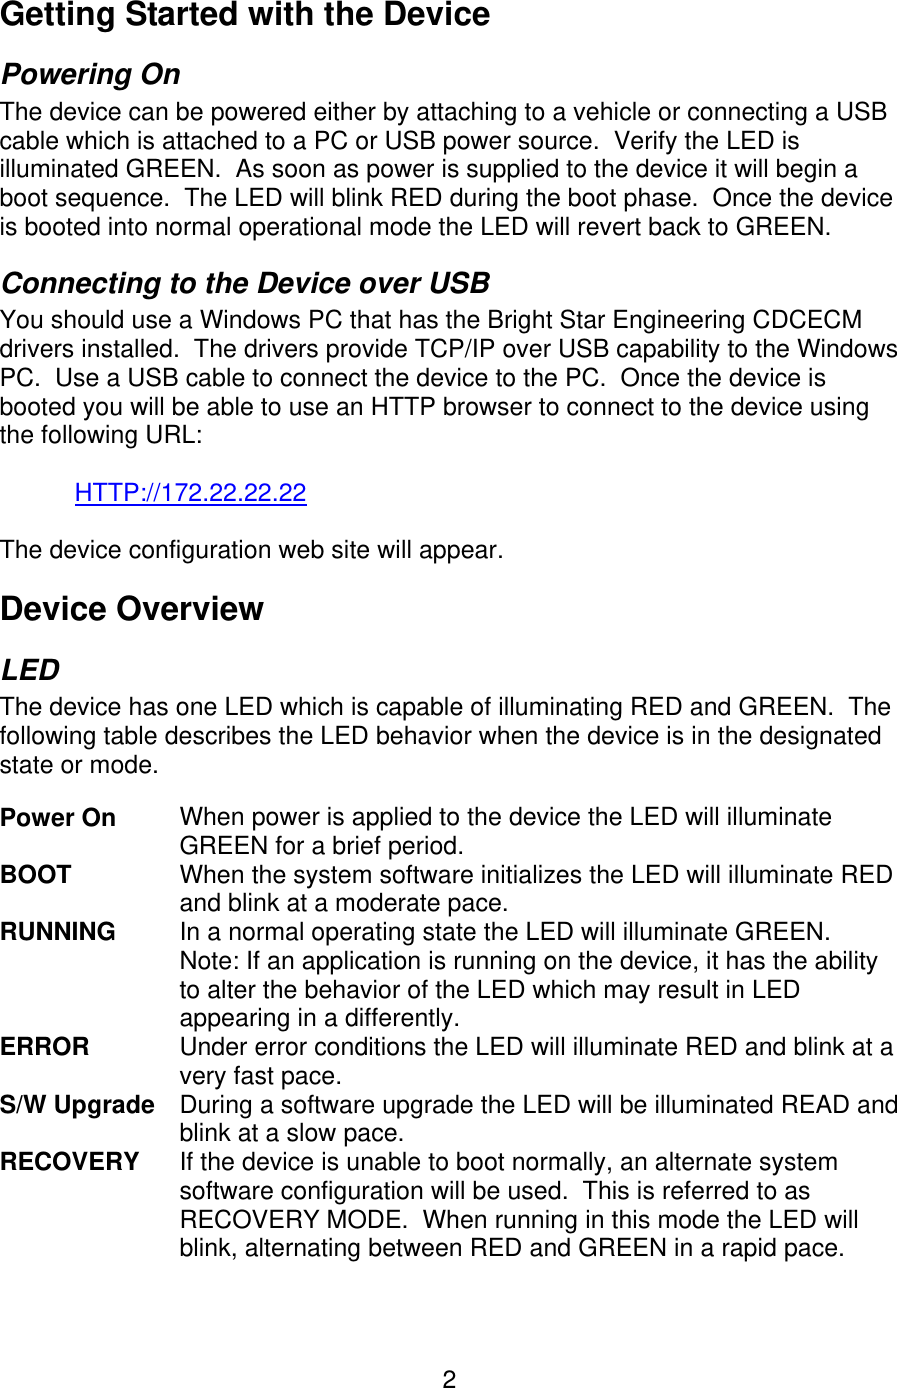   2Getting Started with the Device Powering On The device can be powered either by attaching to a vehicle or connecting a USB cable which is attached to a PC or USB power source.  Verify the LED is illuminated GREEN.  As soon as power is supplied to the device it will begin a boot sequence.  The LED will blink RED during the boot phase.  Once the device is booted into normal operational mode the LED will revert back to GREEN. Connecting to the Device over USB You should use a Windows PC that has the Bright Star Engineering CDCECM drivers installed.  The drivers provide TCP/IP over USB capability to the Windows PC.  Use a USB cable to connect the device to the PC.  Once the device is booted you will be able to use an HTTP browser to connect to the device using the following URL:  HTTP://172.22.22.22  The device configuration web site will appear. Device Overview LED The device has one LED which is capable of illuminating RED and GREEN.  The following table describes the LED behavior when the device is in the designated state or mode.  Power On   When power is applied to the device the LED will illuminate GREEN for a brief period. BOOT  When the system software initializes the LED will illuminate RED and blink at a moderate pace. RUNNING  In a normal operating state the LED will illuminate GREEN.  Note: If an application is running on the device, it has the ability to alter the behavior of the LED which may result in LED appearing in a differently. ERROR      Under error conditions the LED will illuminate RED and blink at a very fast pace. S/W Upgrade  During a software upgrade the LED will be illuminated READ and blink at a slow pace. RECOVERY  If the device is unable to boot normally, an alternate system software configuration will be used.  This is referred to as RECOVERY MODE.  When running in this mode the LED will blink, alternating between RED and GREEN in a rapid pace.  